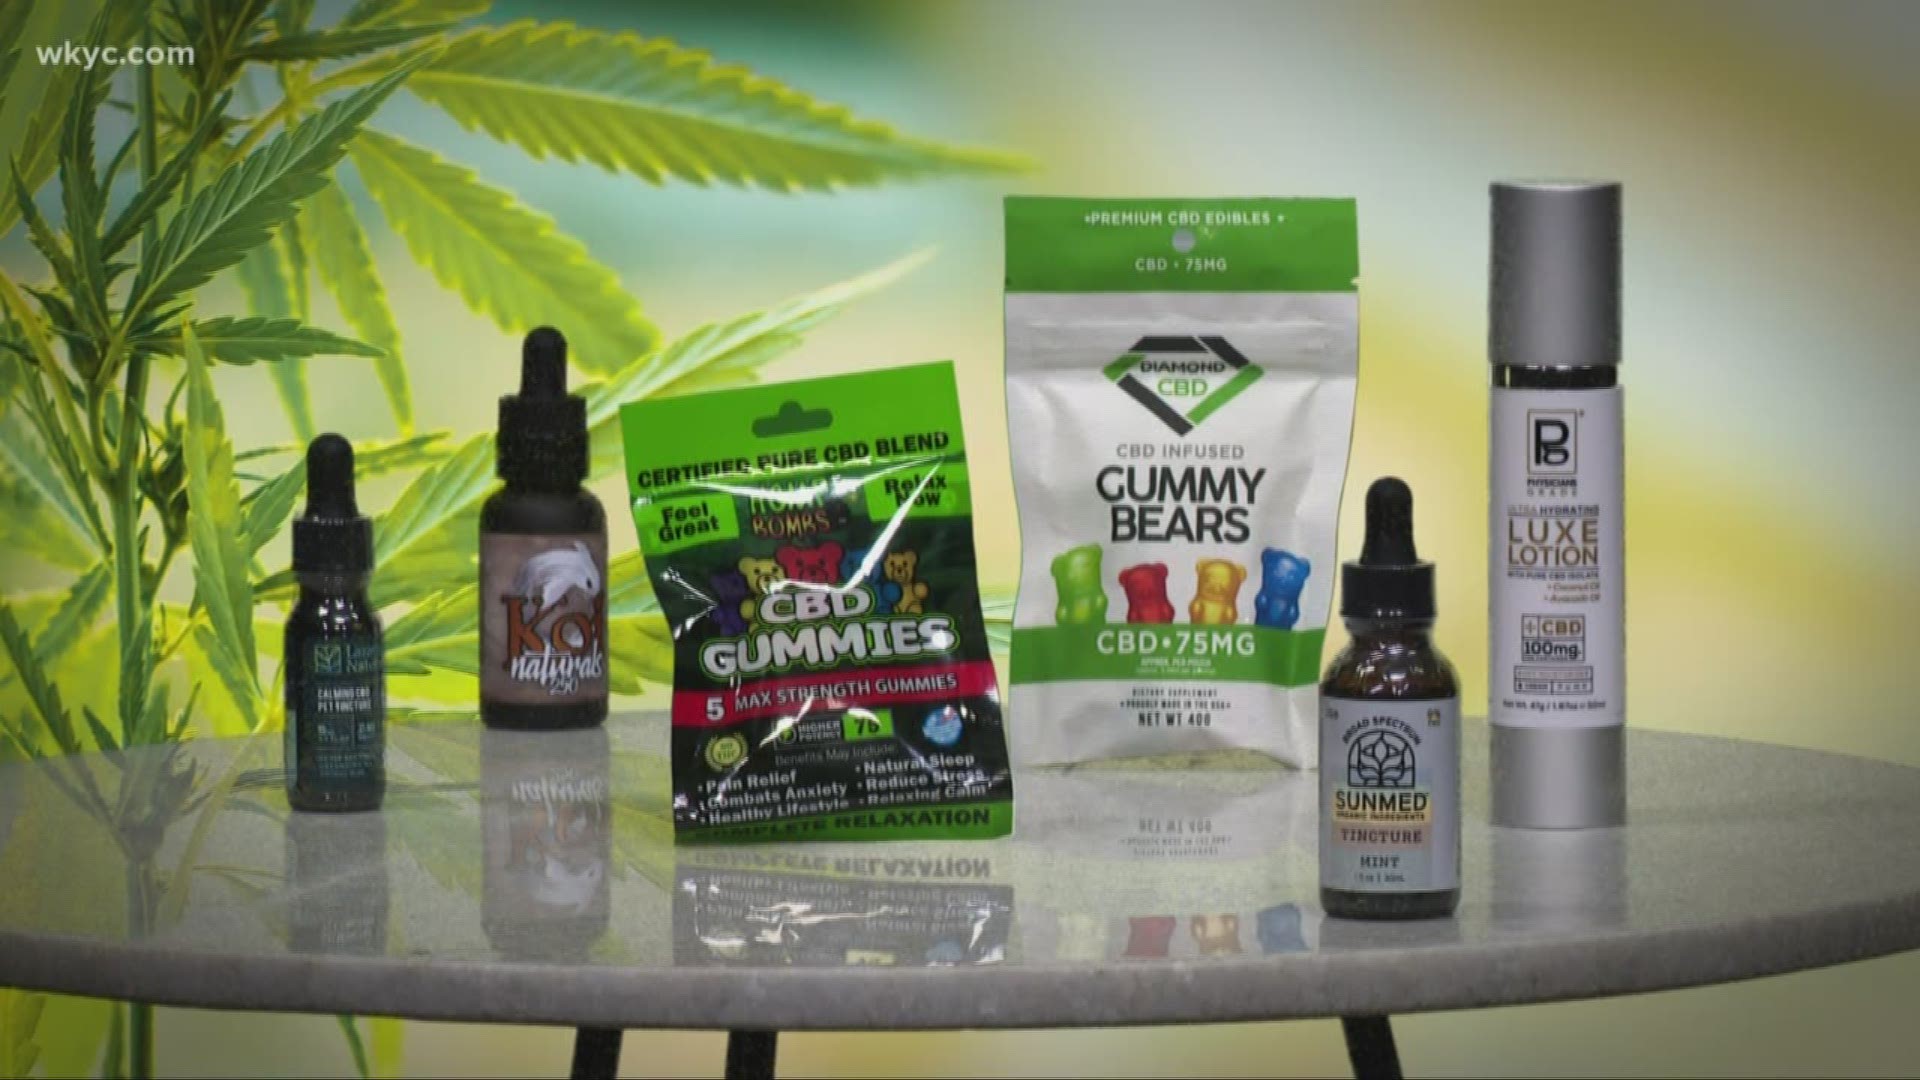 CBD is all the rage right now—marketed to relieve many common health issues. But it’s not a regulated industry.